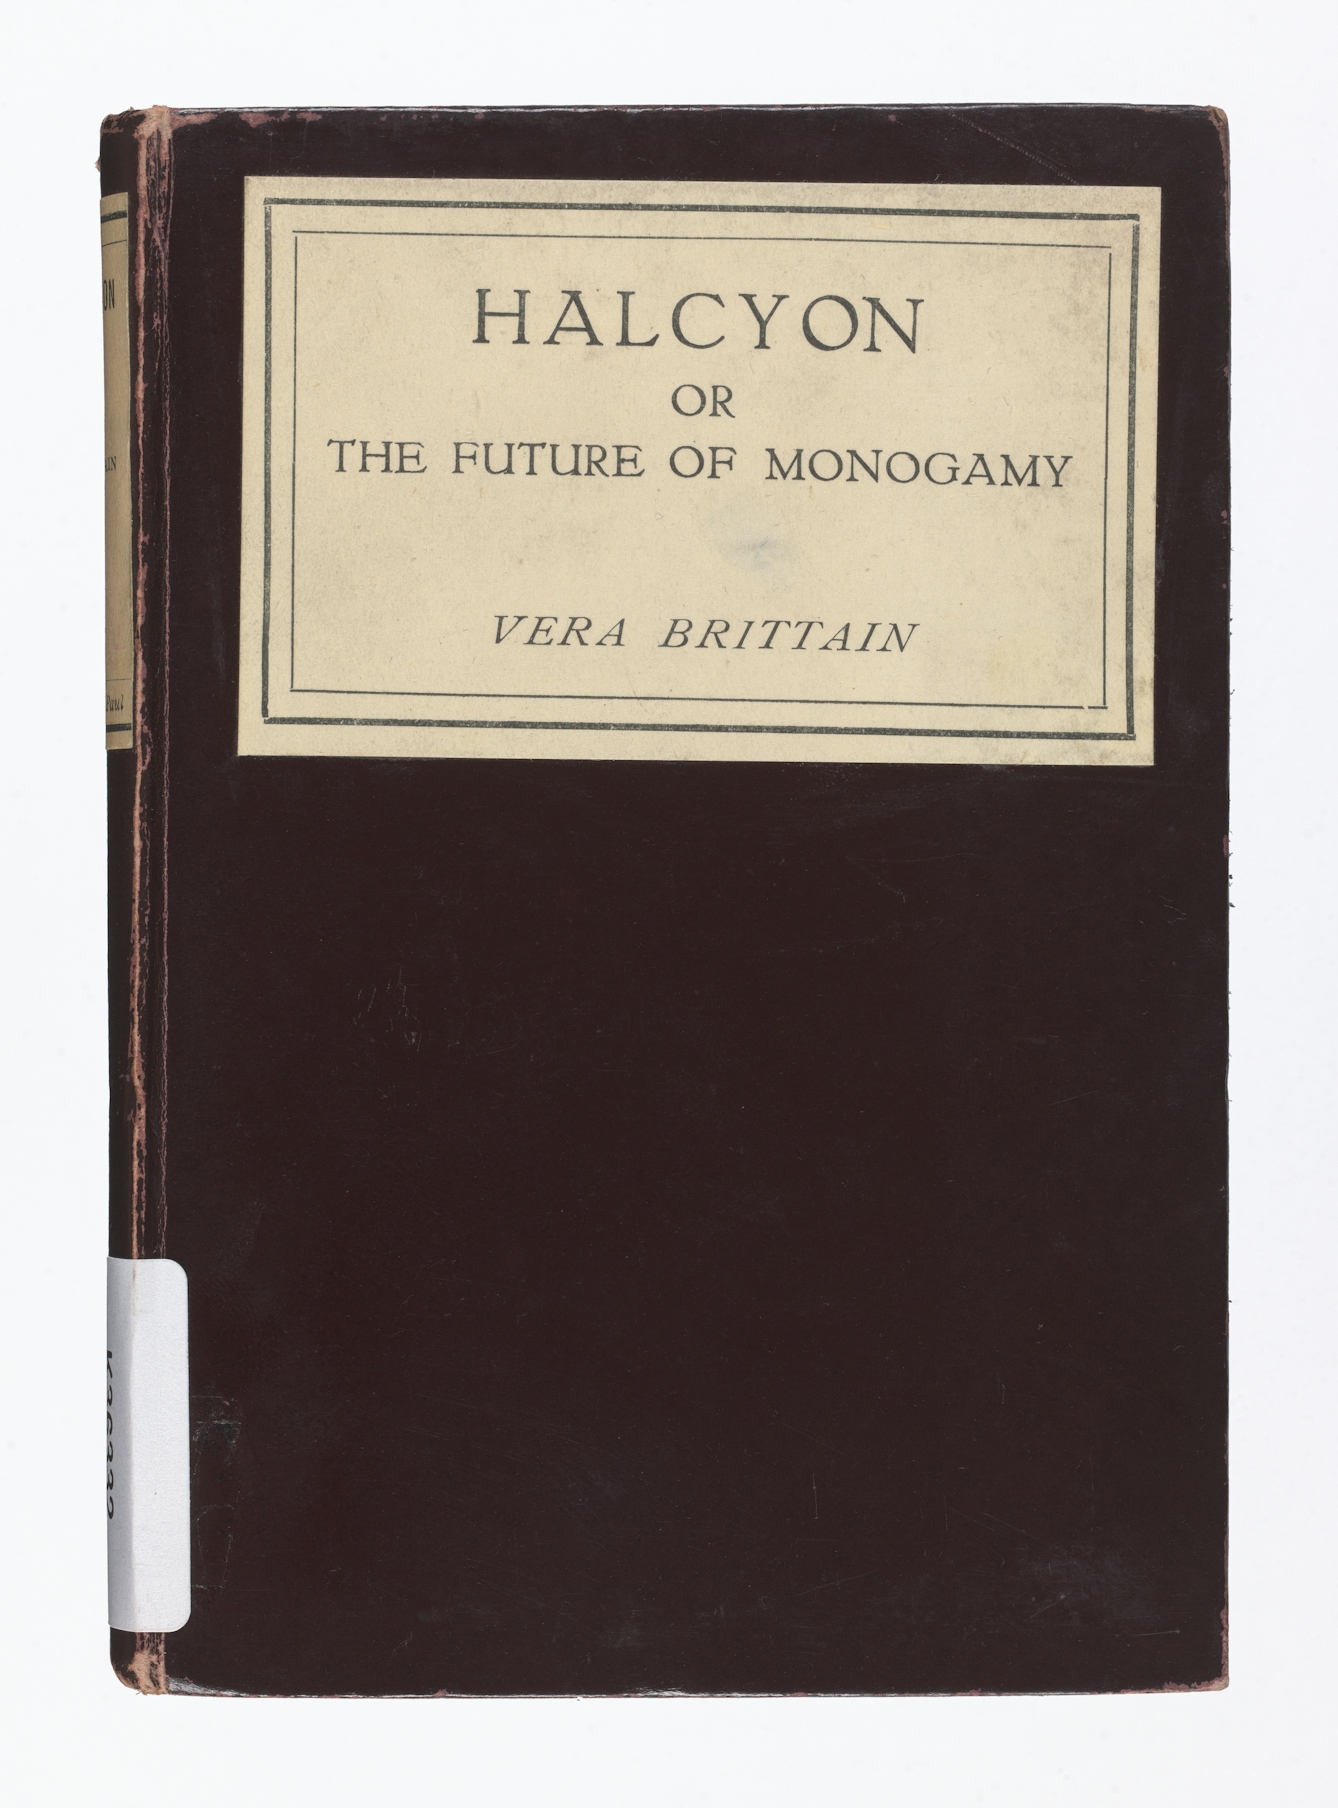 Photograph of the front cover of a book. The cover is brown with the title written within a rectangular label on the top half of the cover. The title reads, "Halcyon, or, The future of monogamy, Vera Brittain".